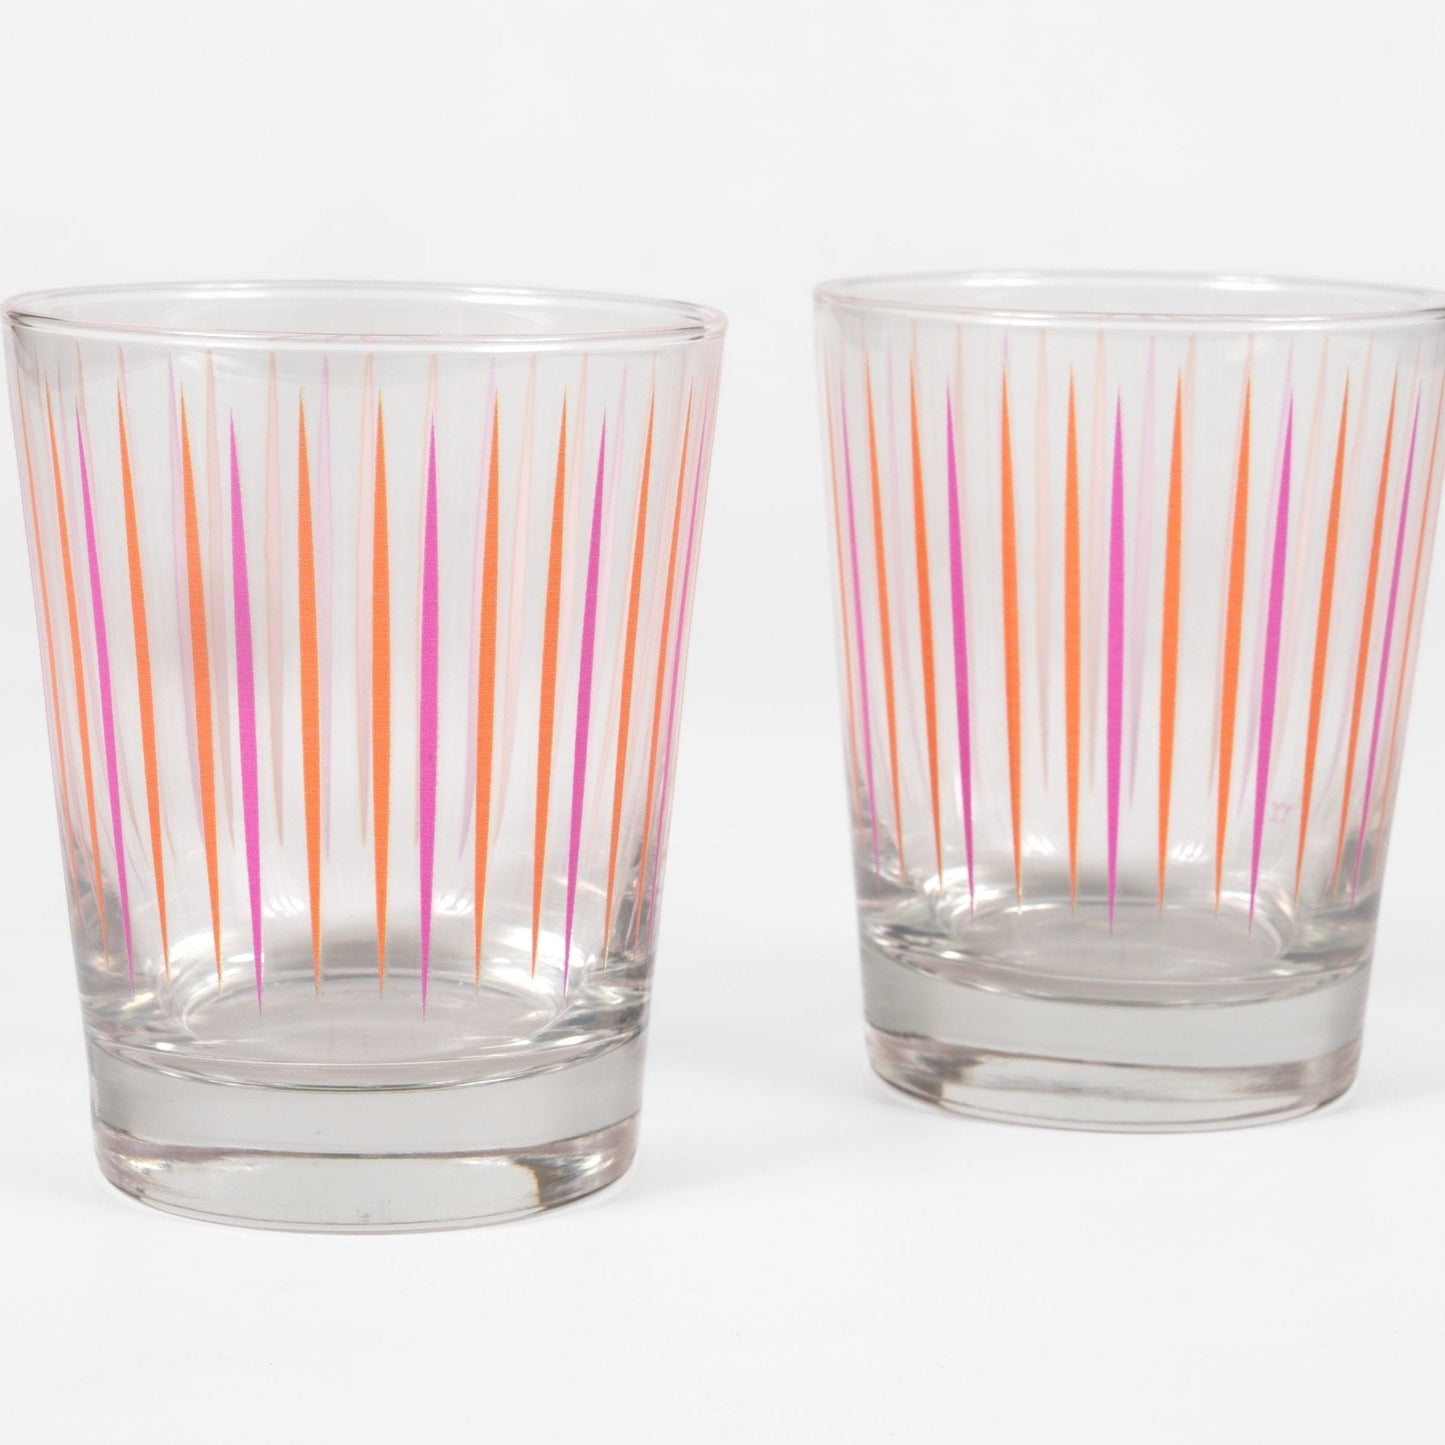 Set of two old fashioned glasses with retro pink and orange design